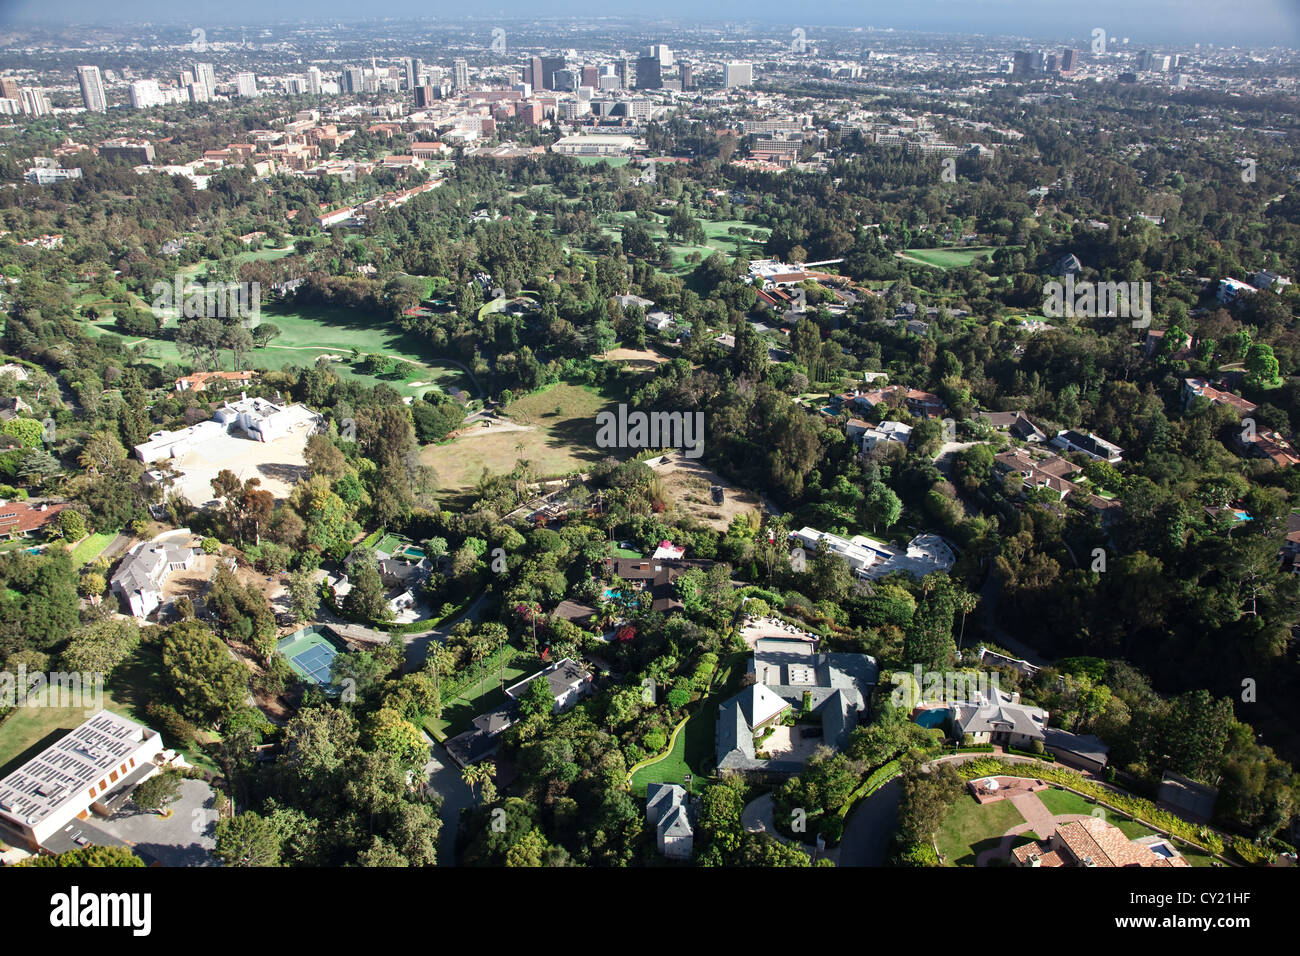 Luxurious homes in the Holmy HIlls district of Los Angeles, California. Stock Photo